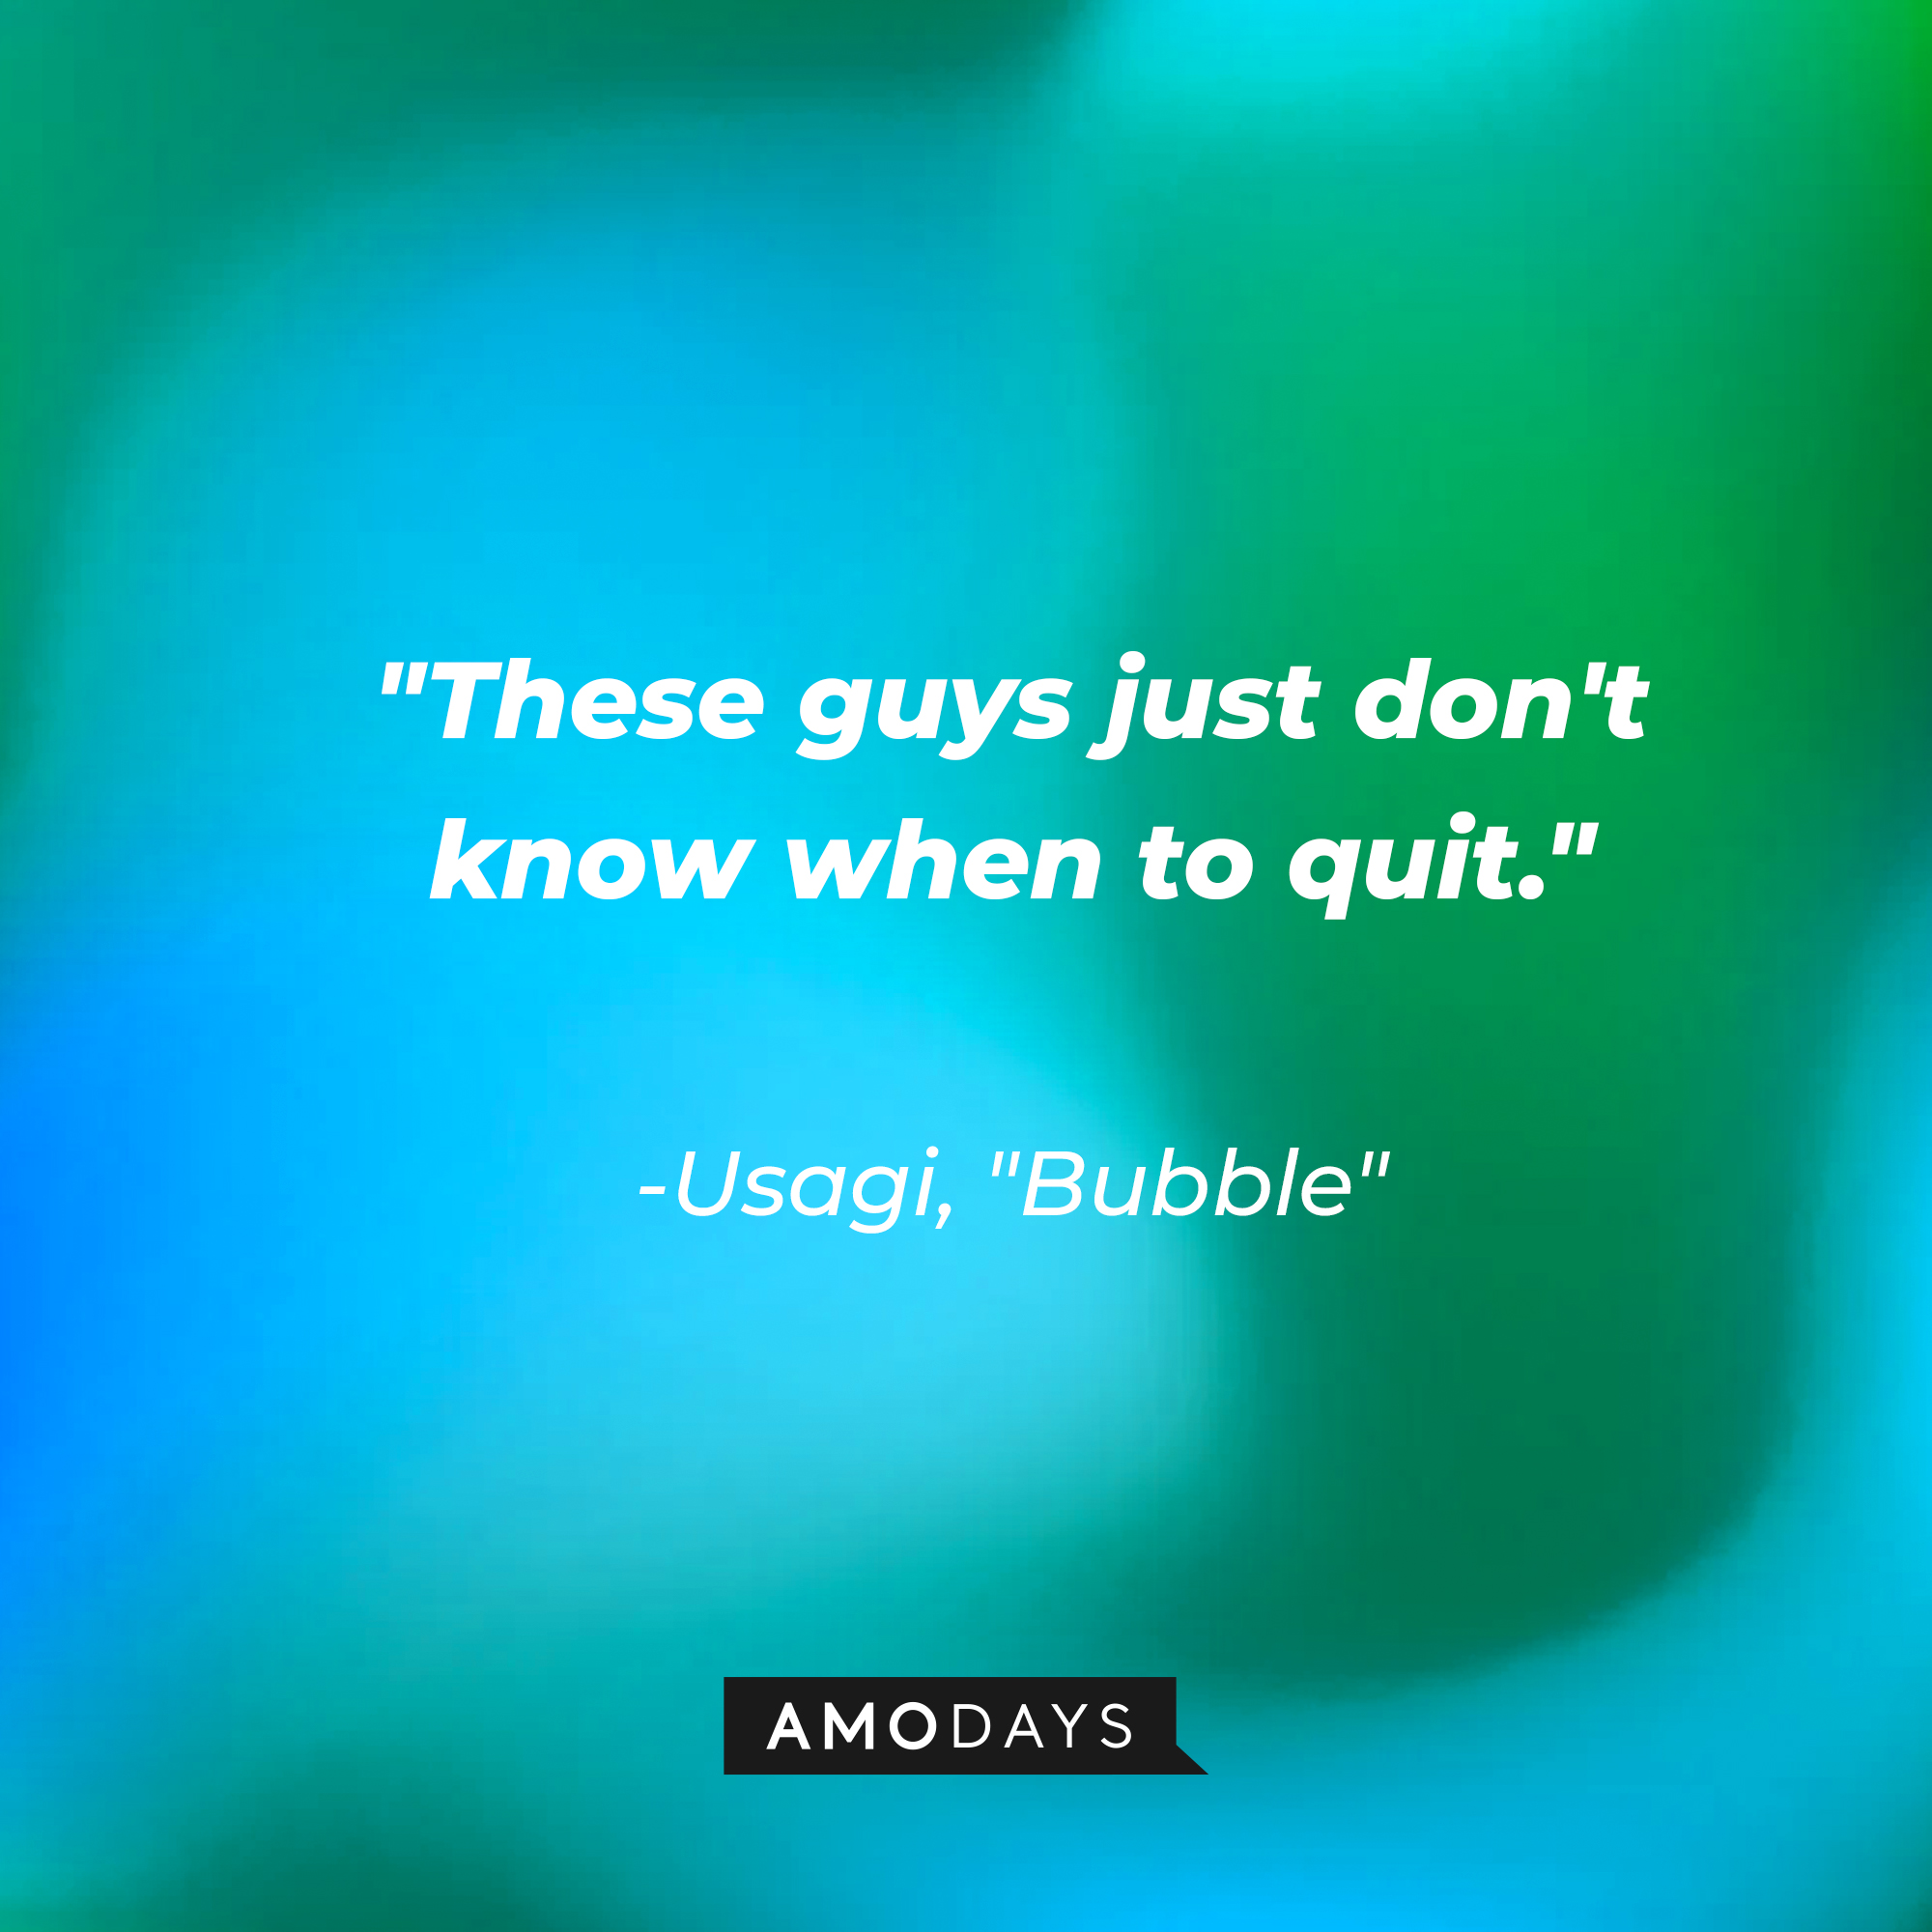 Usagi's quote on "Bubble:" "These guys just don't know when to quit." | Source: AmoDays